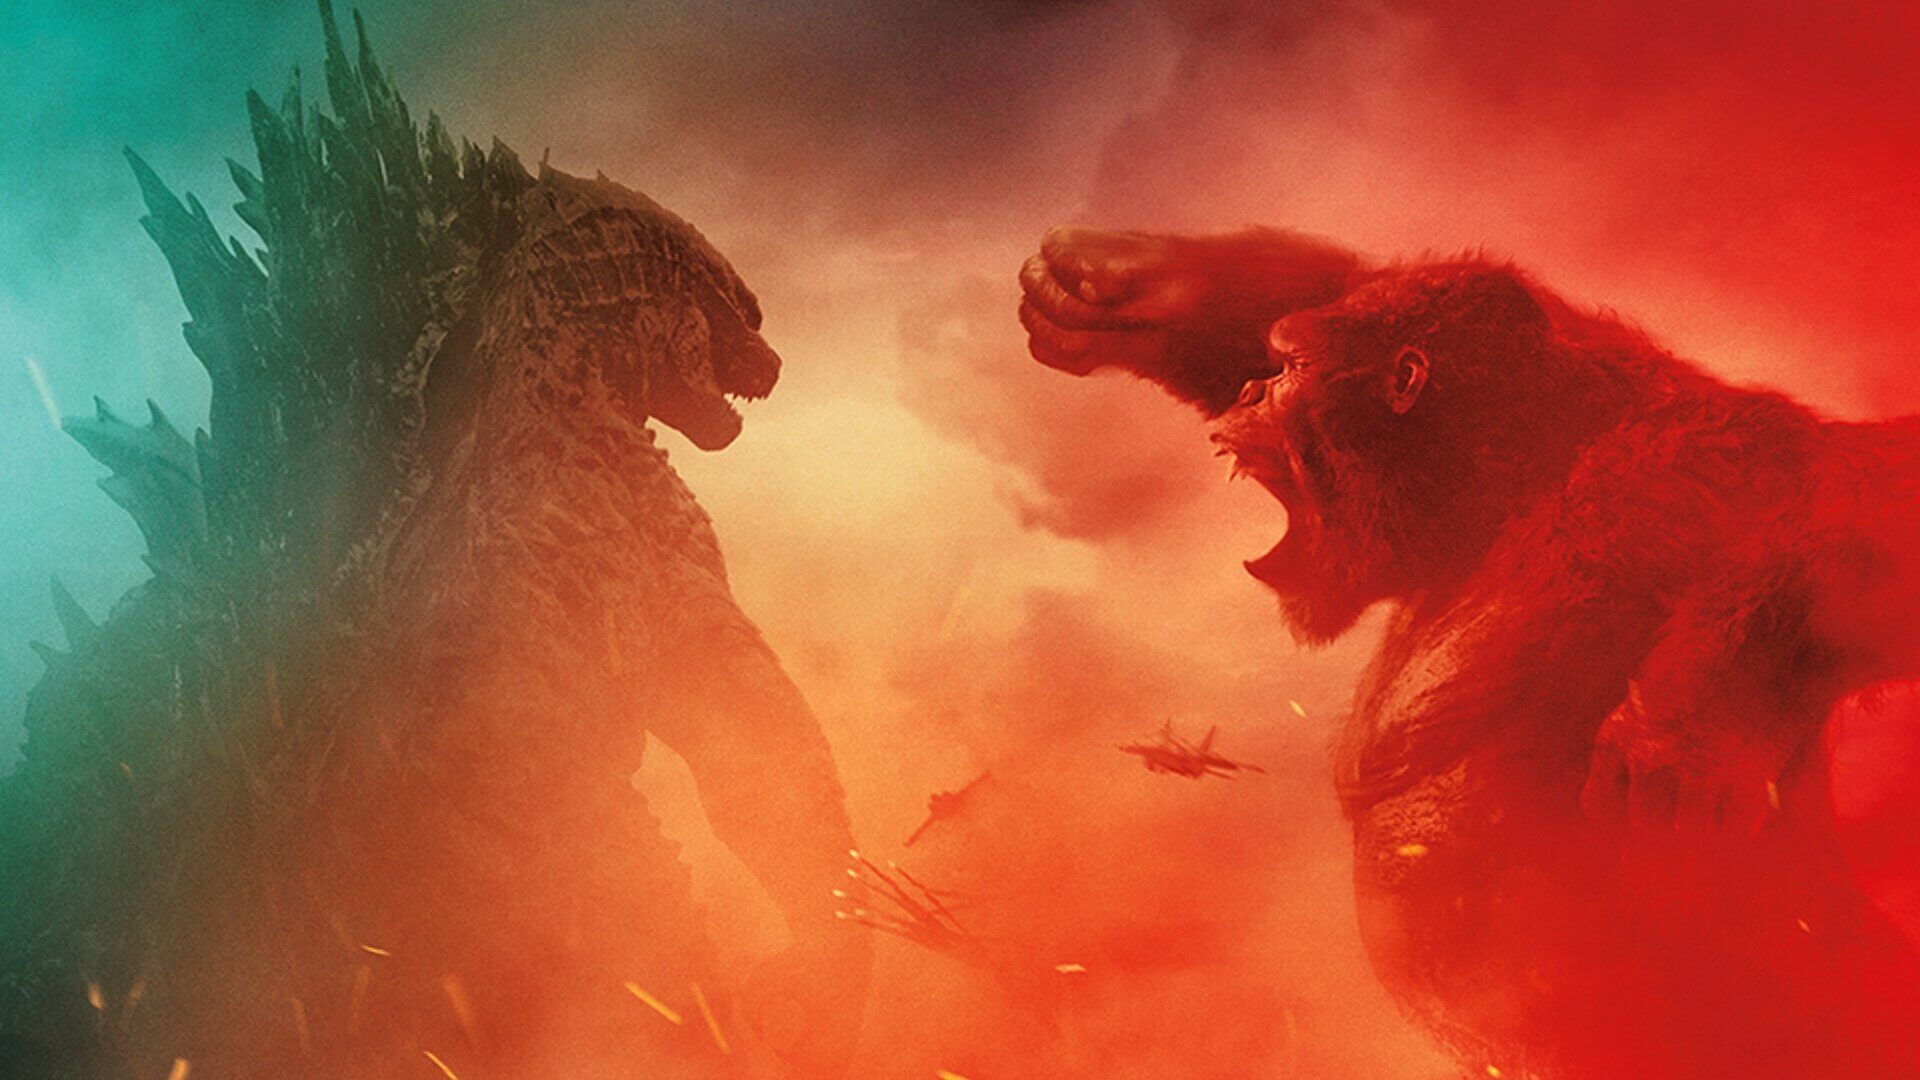 Godzilla Kong sequel and Dune Part Two get release dates